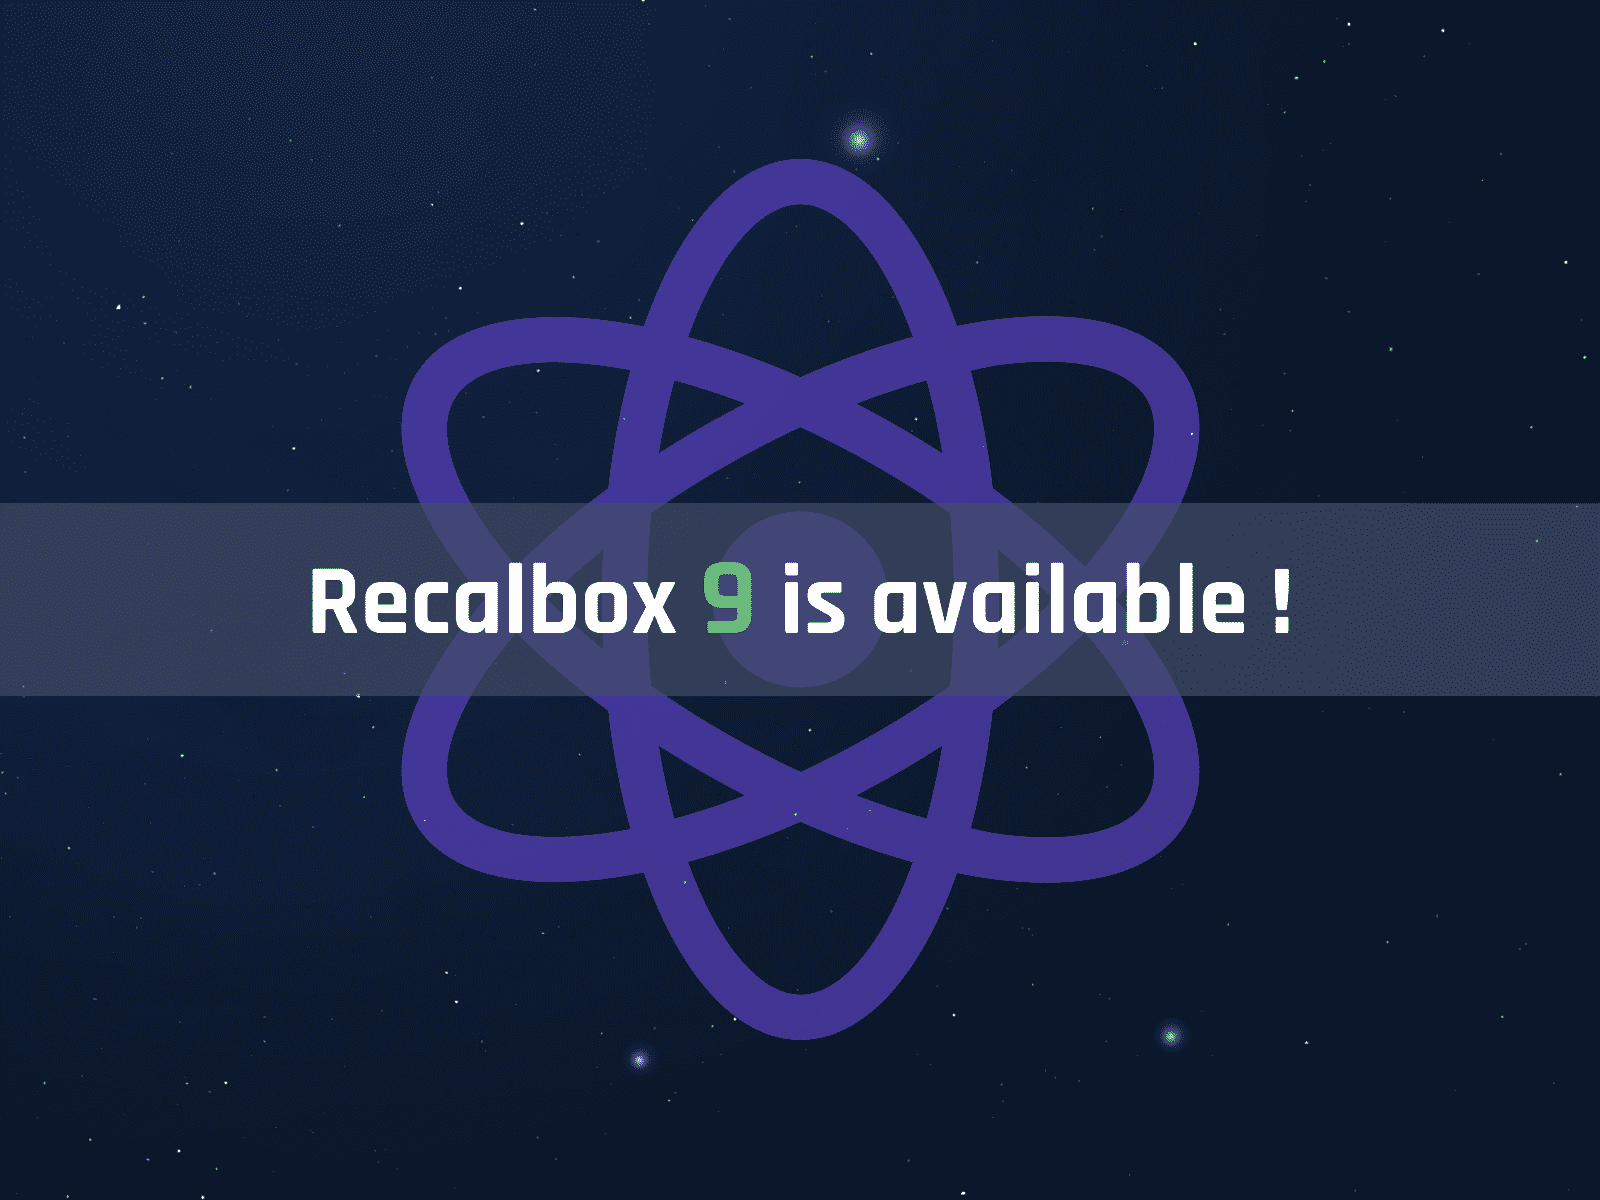 Recalbox 9 is available